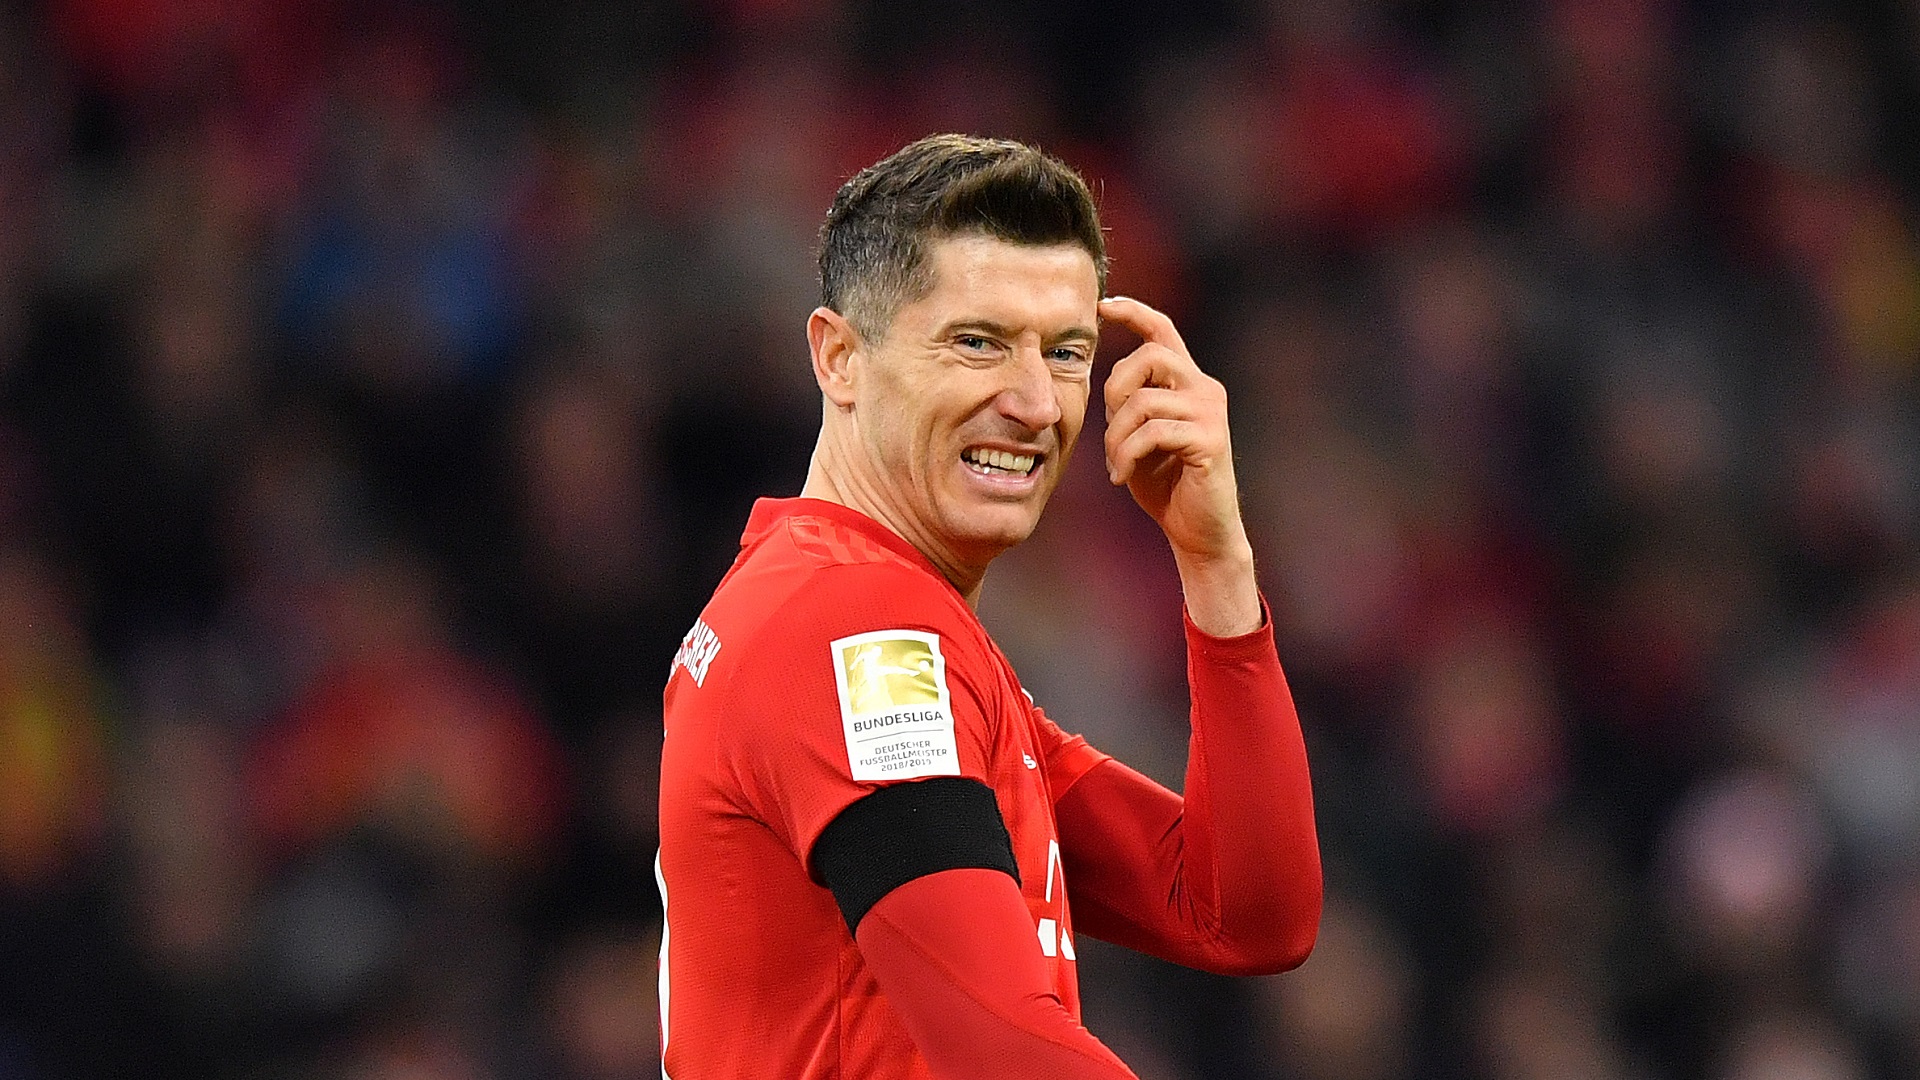 Lewandowski is the best No.9 in the world and Kimmich will be a legend, claims Bayern team-mate Javi Martinez